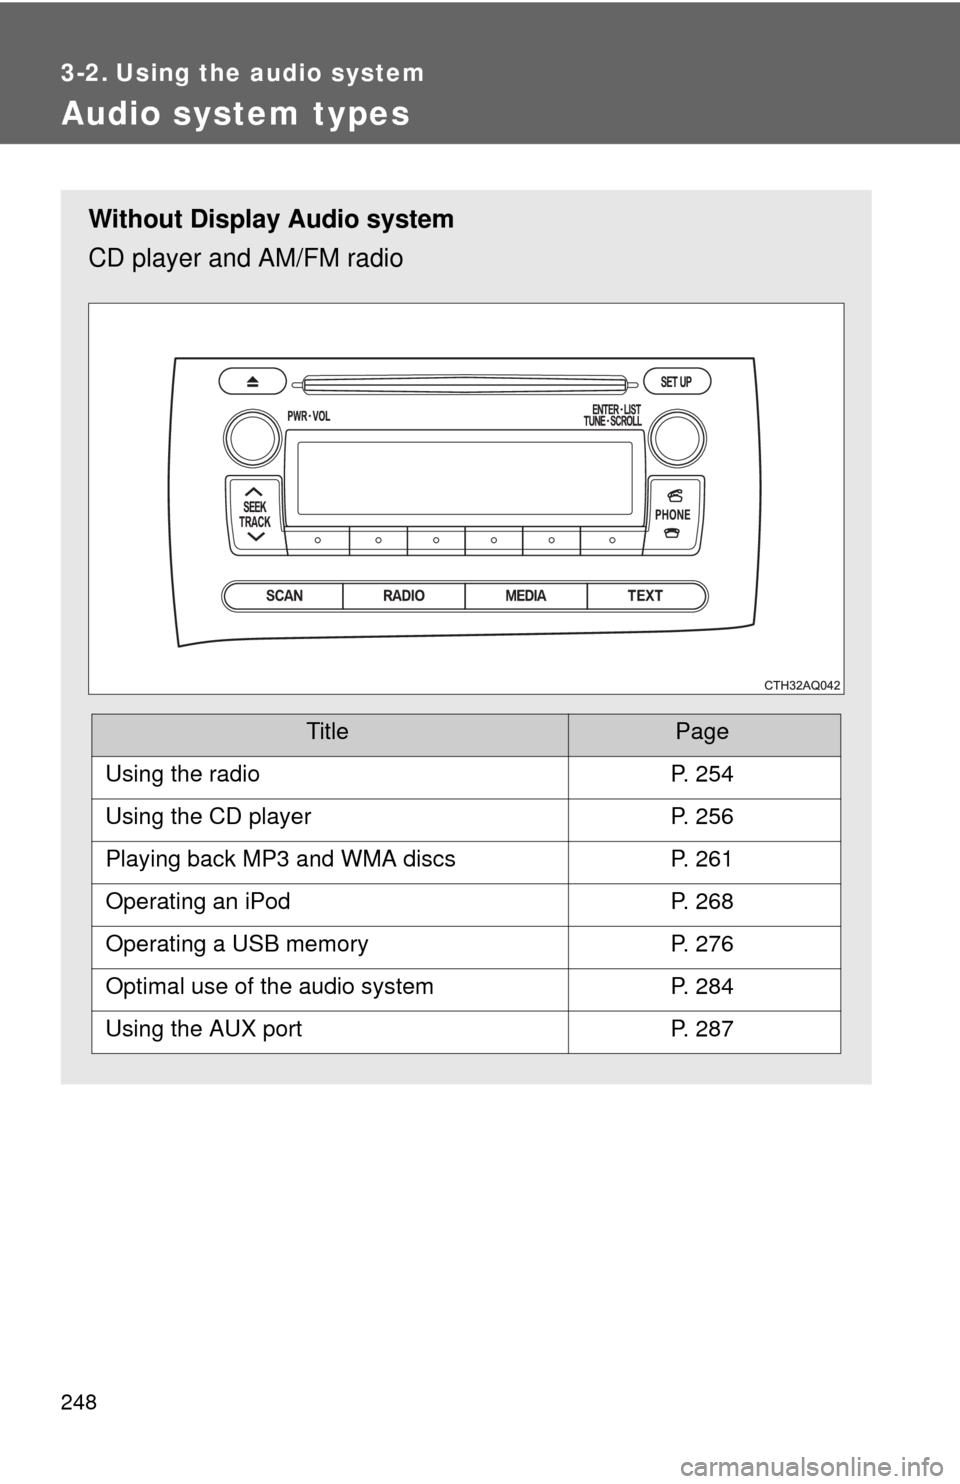 TOYOTA PRIUS C 2014 NHP10 / 1.G User Guide 248
3-2. Using the audio system
Audio system types
Without Display Audio system
CD player and AM/FM radio
TitlePage
Using the radioP. 254
Using the CD playerP. 256
Playing back MP3 and WMA discsP. 261